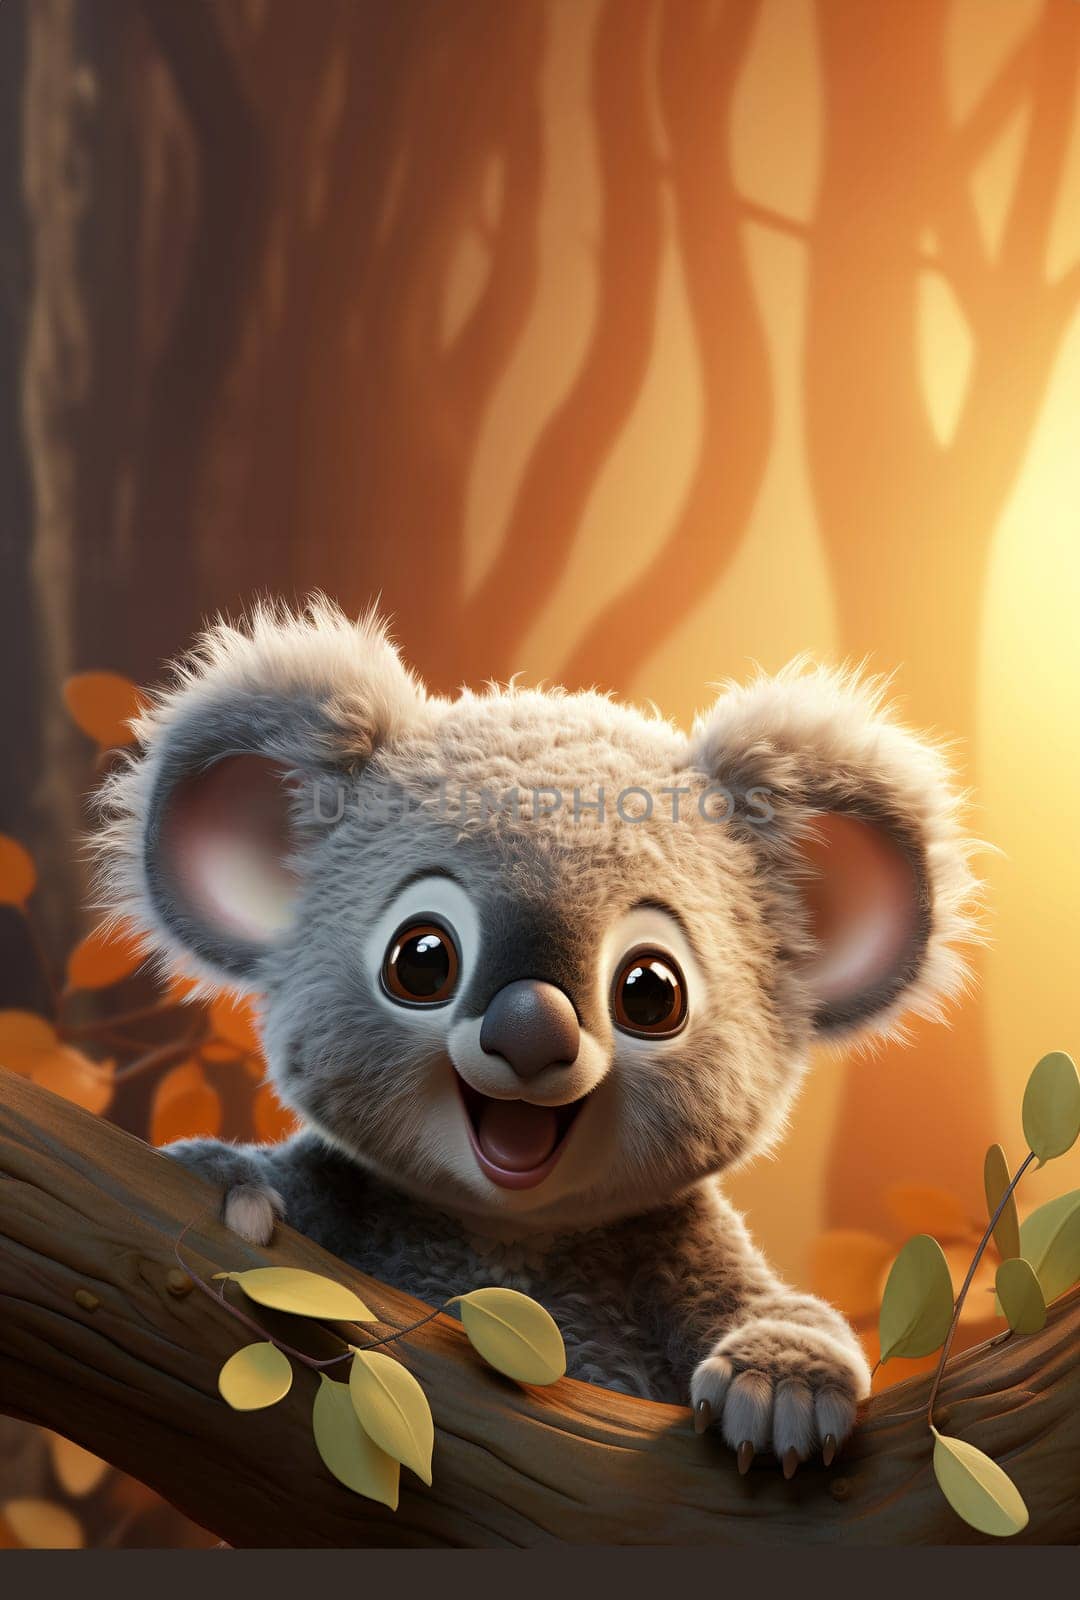 Smiling Koala Cub Clinging to a Tree Branch at Sunset by chrisroll